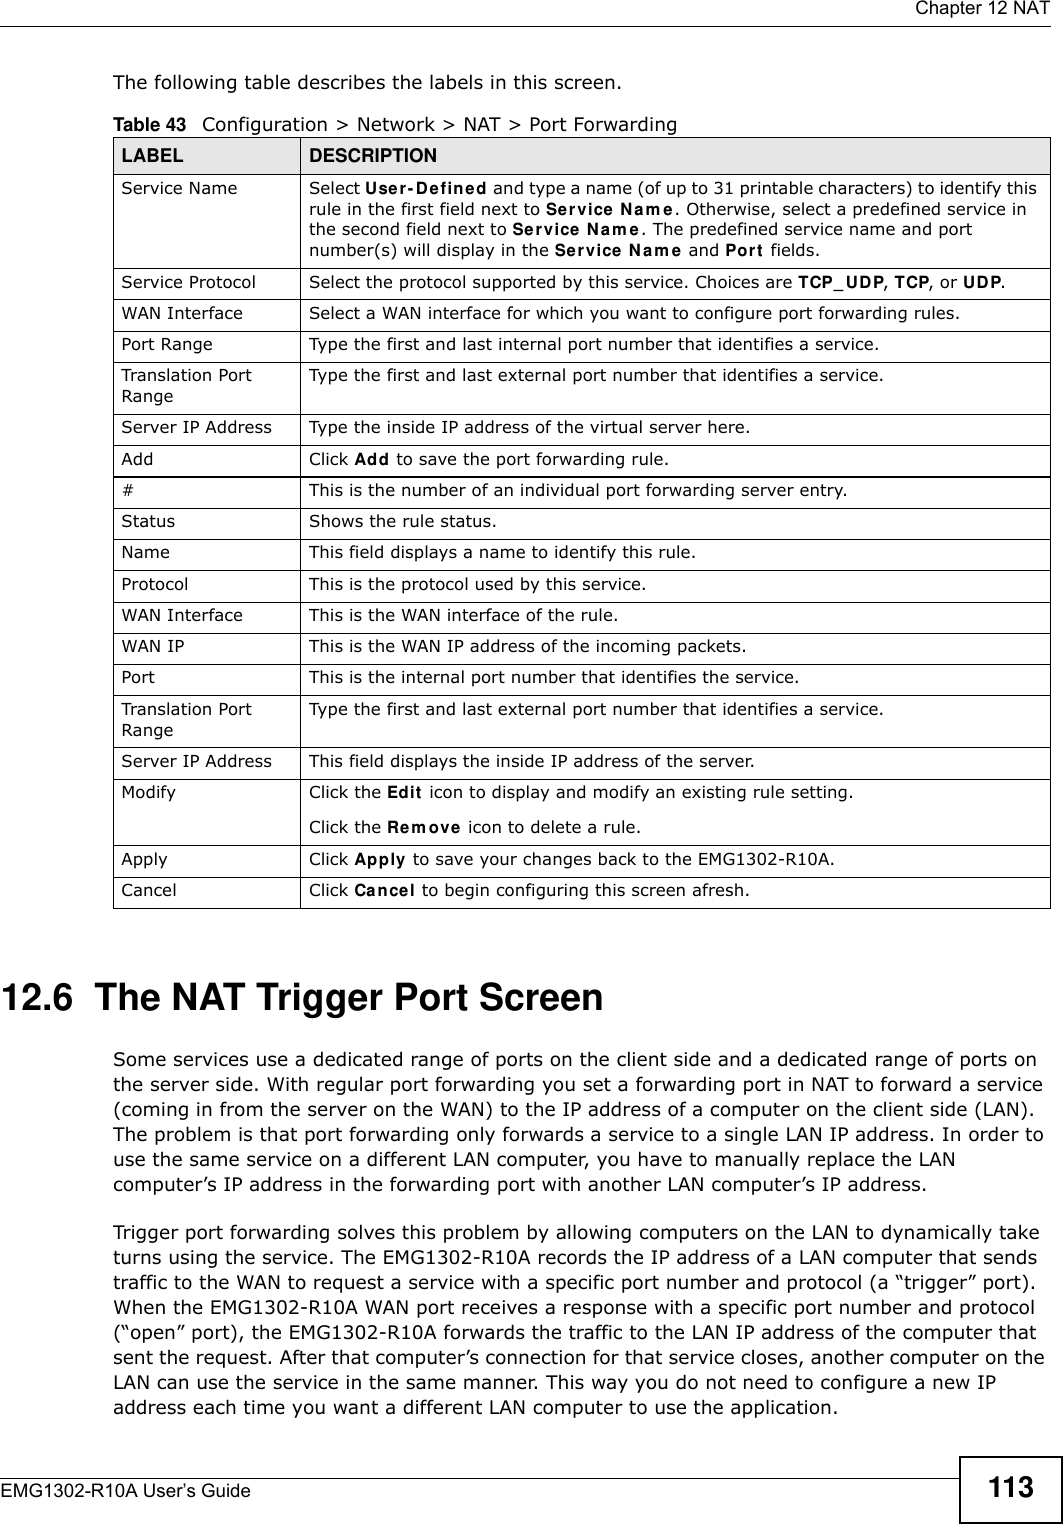  Chapter 12 NATEMG1302-R10A User’s Guide 113The following table describes the labels in this screen.12.6  The NAT Trigger Port ScreenSome services use a dedicated range of ports on the client side and a dedicated range of ports on the server side. With regular port forwarding you set a forwarding port in NAT to forward a service (coming in from the server on the WAN) to the IP address of a computer on the client side (LAN). The problem is that port forwarding only forwards a service to a single LAN IP address. In order to use the same service on a different LAN computer, you have to manually replace the LAN computer’s IP address in the forwarding port with another LAN computer’s IP address.Trigger port forwarding solves this problem by allowing computers on the LAN to dynamically take turns using the service. The EMG1302-R10A records the IP address of a LAN computer that sends traffic to the WAN to request a service with a specific port number and protocol (a “trigger” port). When the EMG1302-R10A WAN port receives a response with a specific port number and protocol (“open” port), the EMG1302-R10A forwards the traffic to the LAN IP address of the computer that sent the request. After that computer’s connection for that service closes, another computer on the LAN can use the service in the same manner. This way you do not need to configure a new IP address each time you want a different LAN computer to use the application.Table 43   Configuration &gt; Network &gt; NAT &gt; Port ForwardingLABEL DESCRIPTIONService Name Select U se r- D efine d and type a name (of up to 31 printable characters) to identify this rule in the first field next to Ser vice Nam e. Otherwise, select a predefined service in the second field next to Se r vice  N a m e . The predefined service name and port number(s) will display in the Service N am e  and Port fields.Service Protocol Select the protocol supported by this service. Choices are TCP_ UDP, TCP, or UDP.WAN Interface Select a WAN interface for which you want to configure port forwarding rules.Port Range Type the first and last internal port number that identifies a service.Translation Port RangeType the first and last external port number that identifies a service.Server IP Address Type the inside IP address of the virtual server here.Add Click Add to save the port forwarding rule.#This is the number of an individual port forwarding server entry.Status Shows the rule status.Name This field displays a name to identify this rule.Protocol This is the protocol used by this service. WAN Interface This is the WAN interface of the rule.WAN IP This is the WAN IP address of the incoming packets.Port This is the internal port number that identifies the service.Translation Port RangeType the first and last external port number that identifies a service.Server IP Address This field displays the inside IP address of the server.Modify Click the Edit  icon to display and modify an existing rule setting.Click the Rem ove icon to delete a rule.Apply Click Apply to save your changes back to the EMG1302-R10A.Cancel Click Can cel to begin configuring this screen afresh.